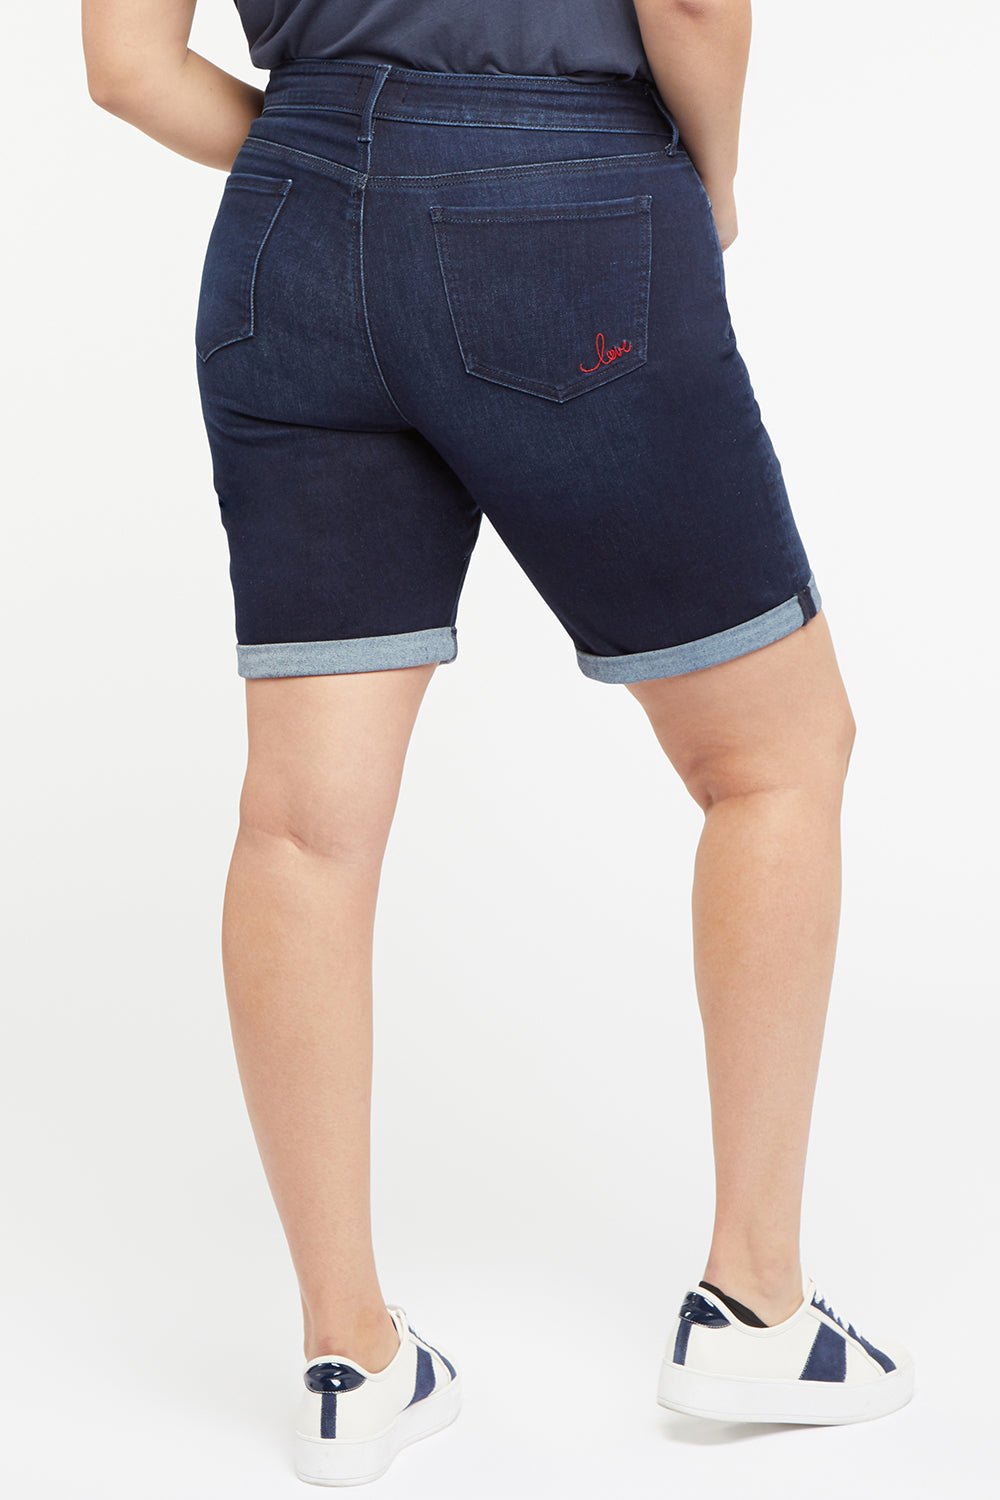 NYDJ Ella Denim Shorts In Plus Size With Roll Cuffs And Love Embroidery - Rapture